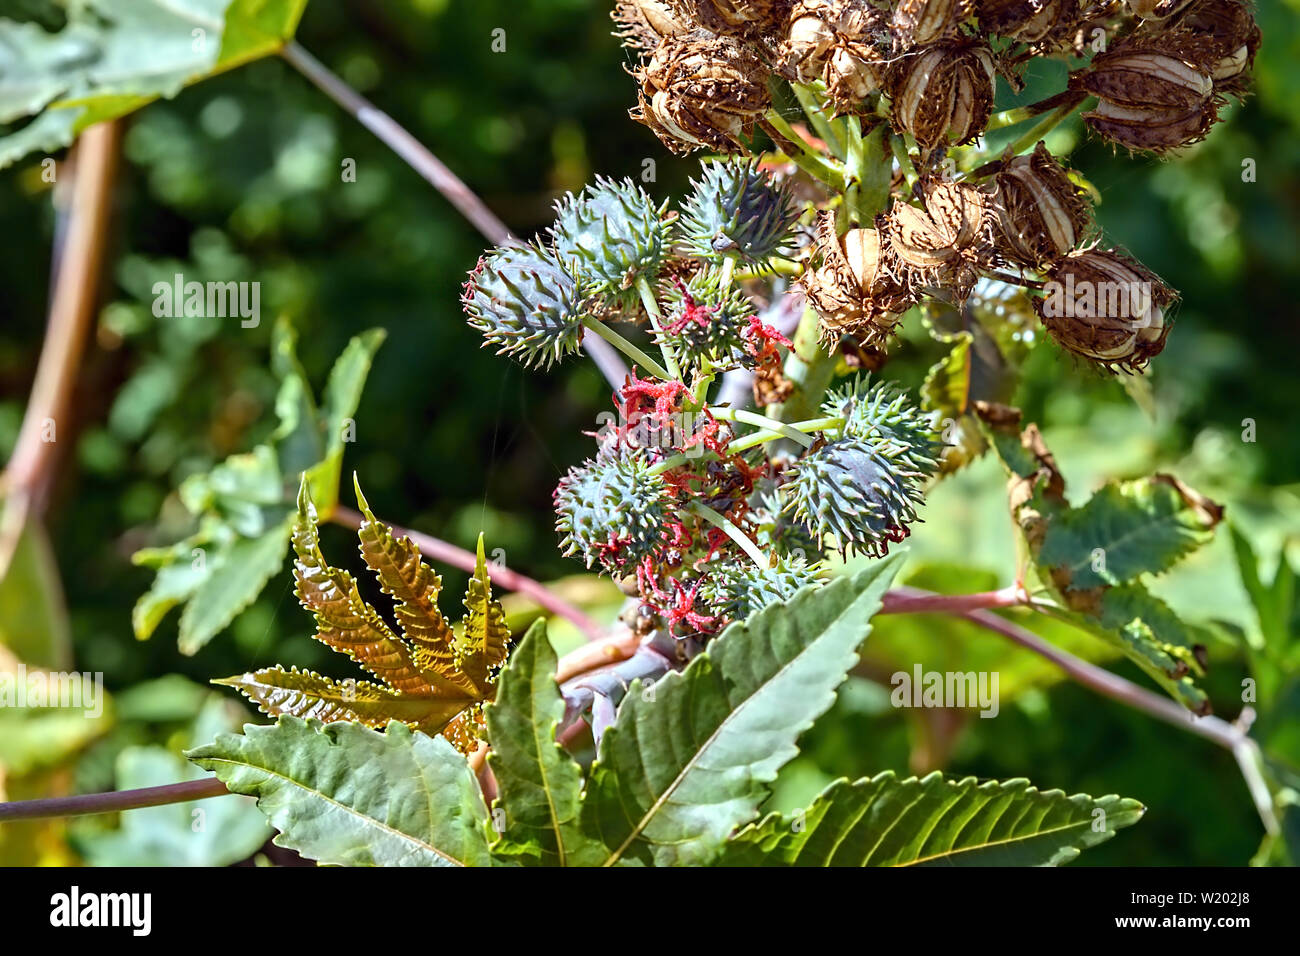 A Ricinus communis plant with green capsule, fresh flower and burst seed pod as well as leaves. A highly poisonous pest, also called Wunderbaum. Stock Photo